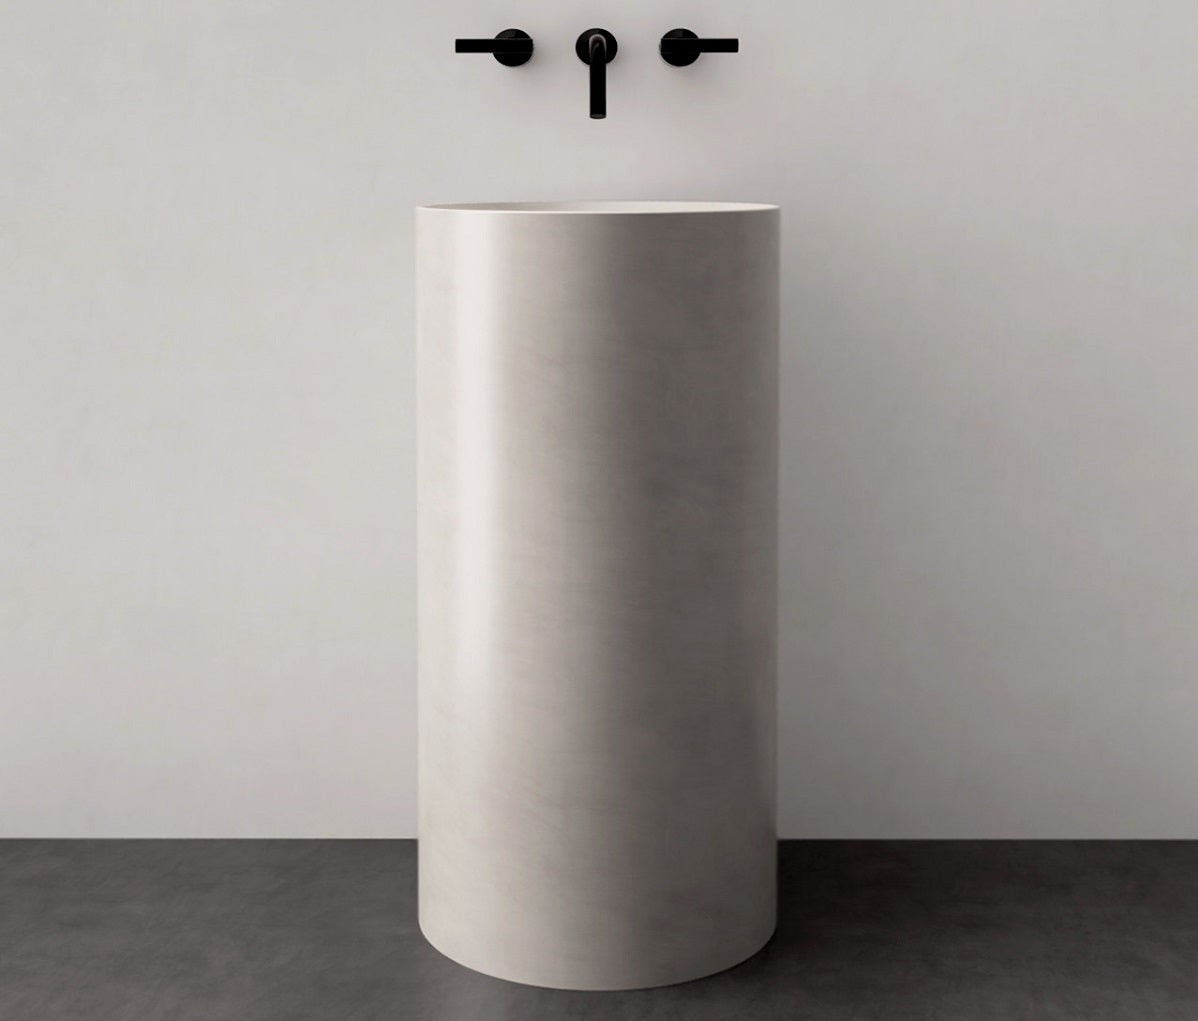 Cylindrical pedestal sink in white concrete.